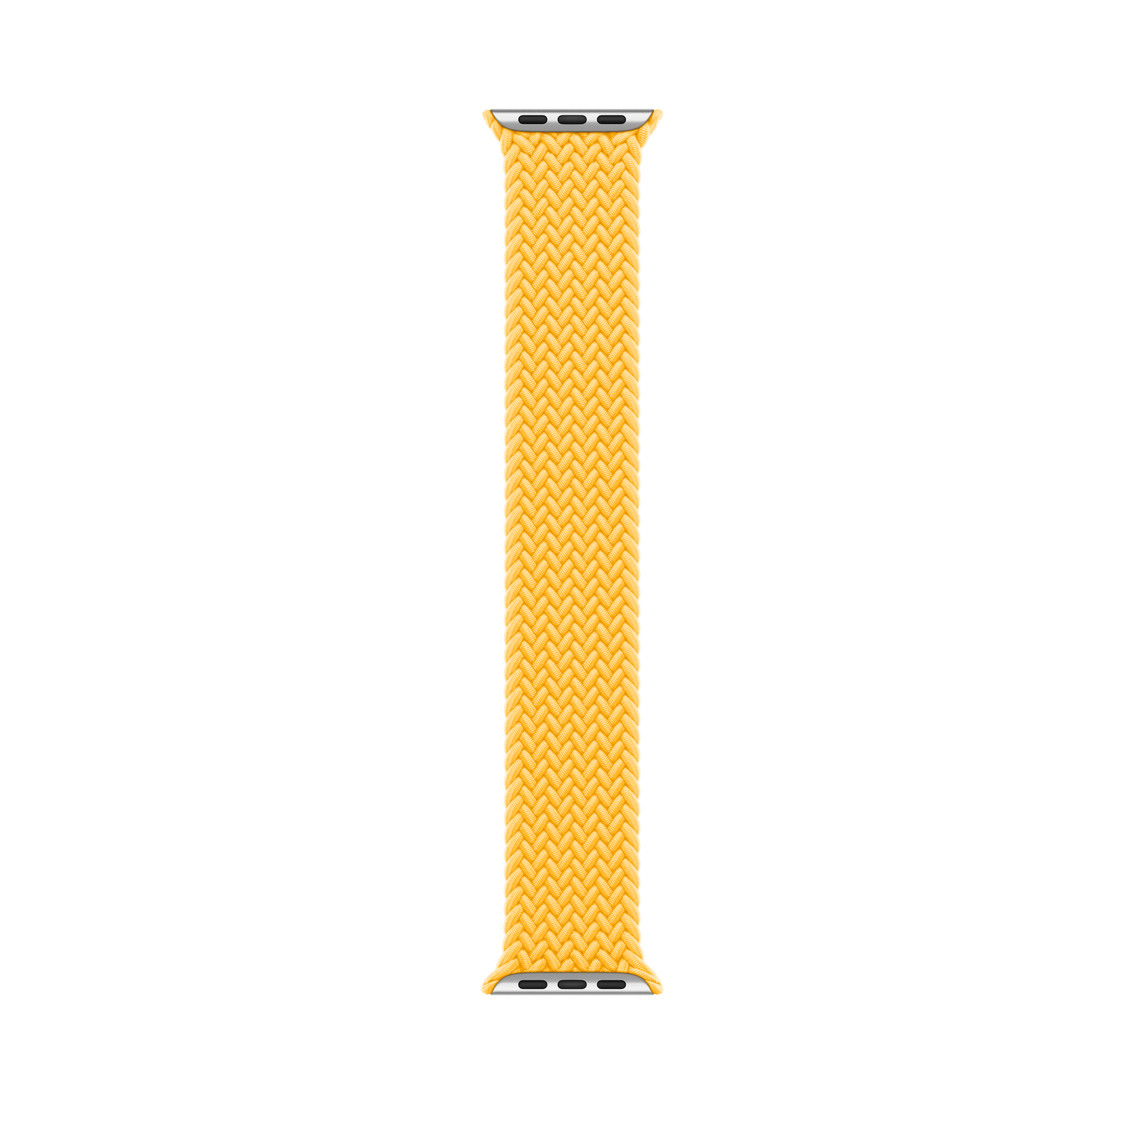 Sunshine Braided Solo Loop band, woven polyester and silicone threads with no clasps or buckles